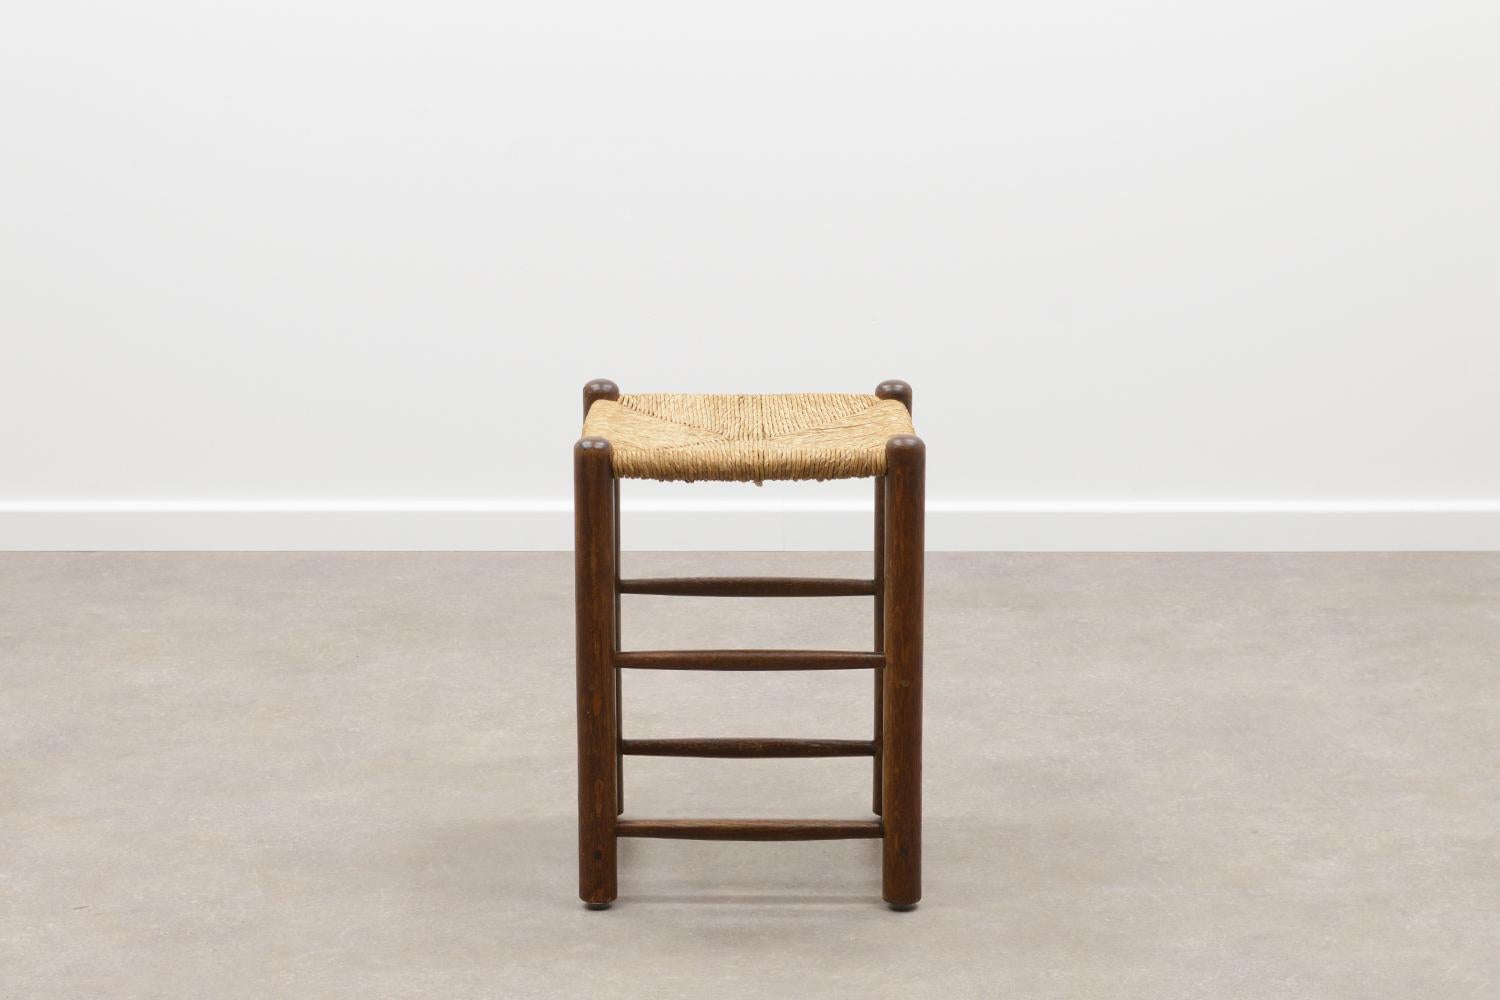 Set of 4 French rush stools in the style of Charlotte Perriand 50s. Solid wood frames and woven rush seat. The stools have some repares and wear, but are fully functional and give a nice wabi sabi feel. Price is for the set of 4. 

 